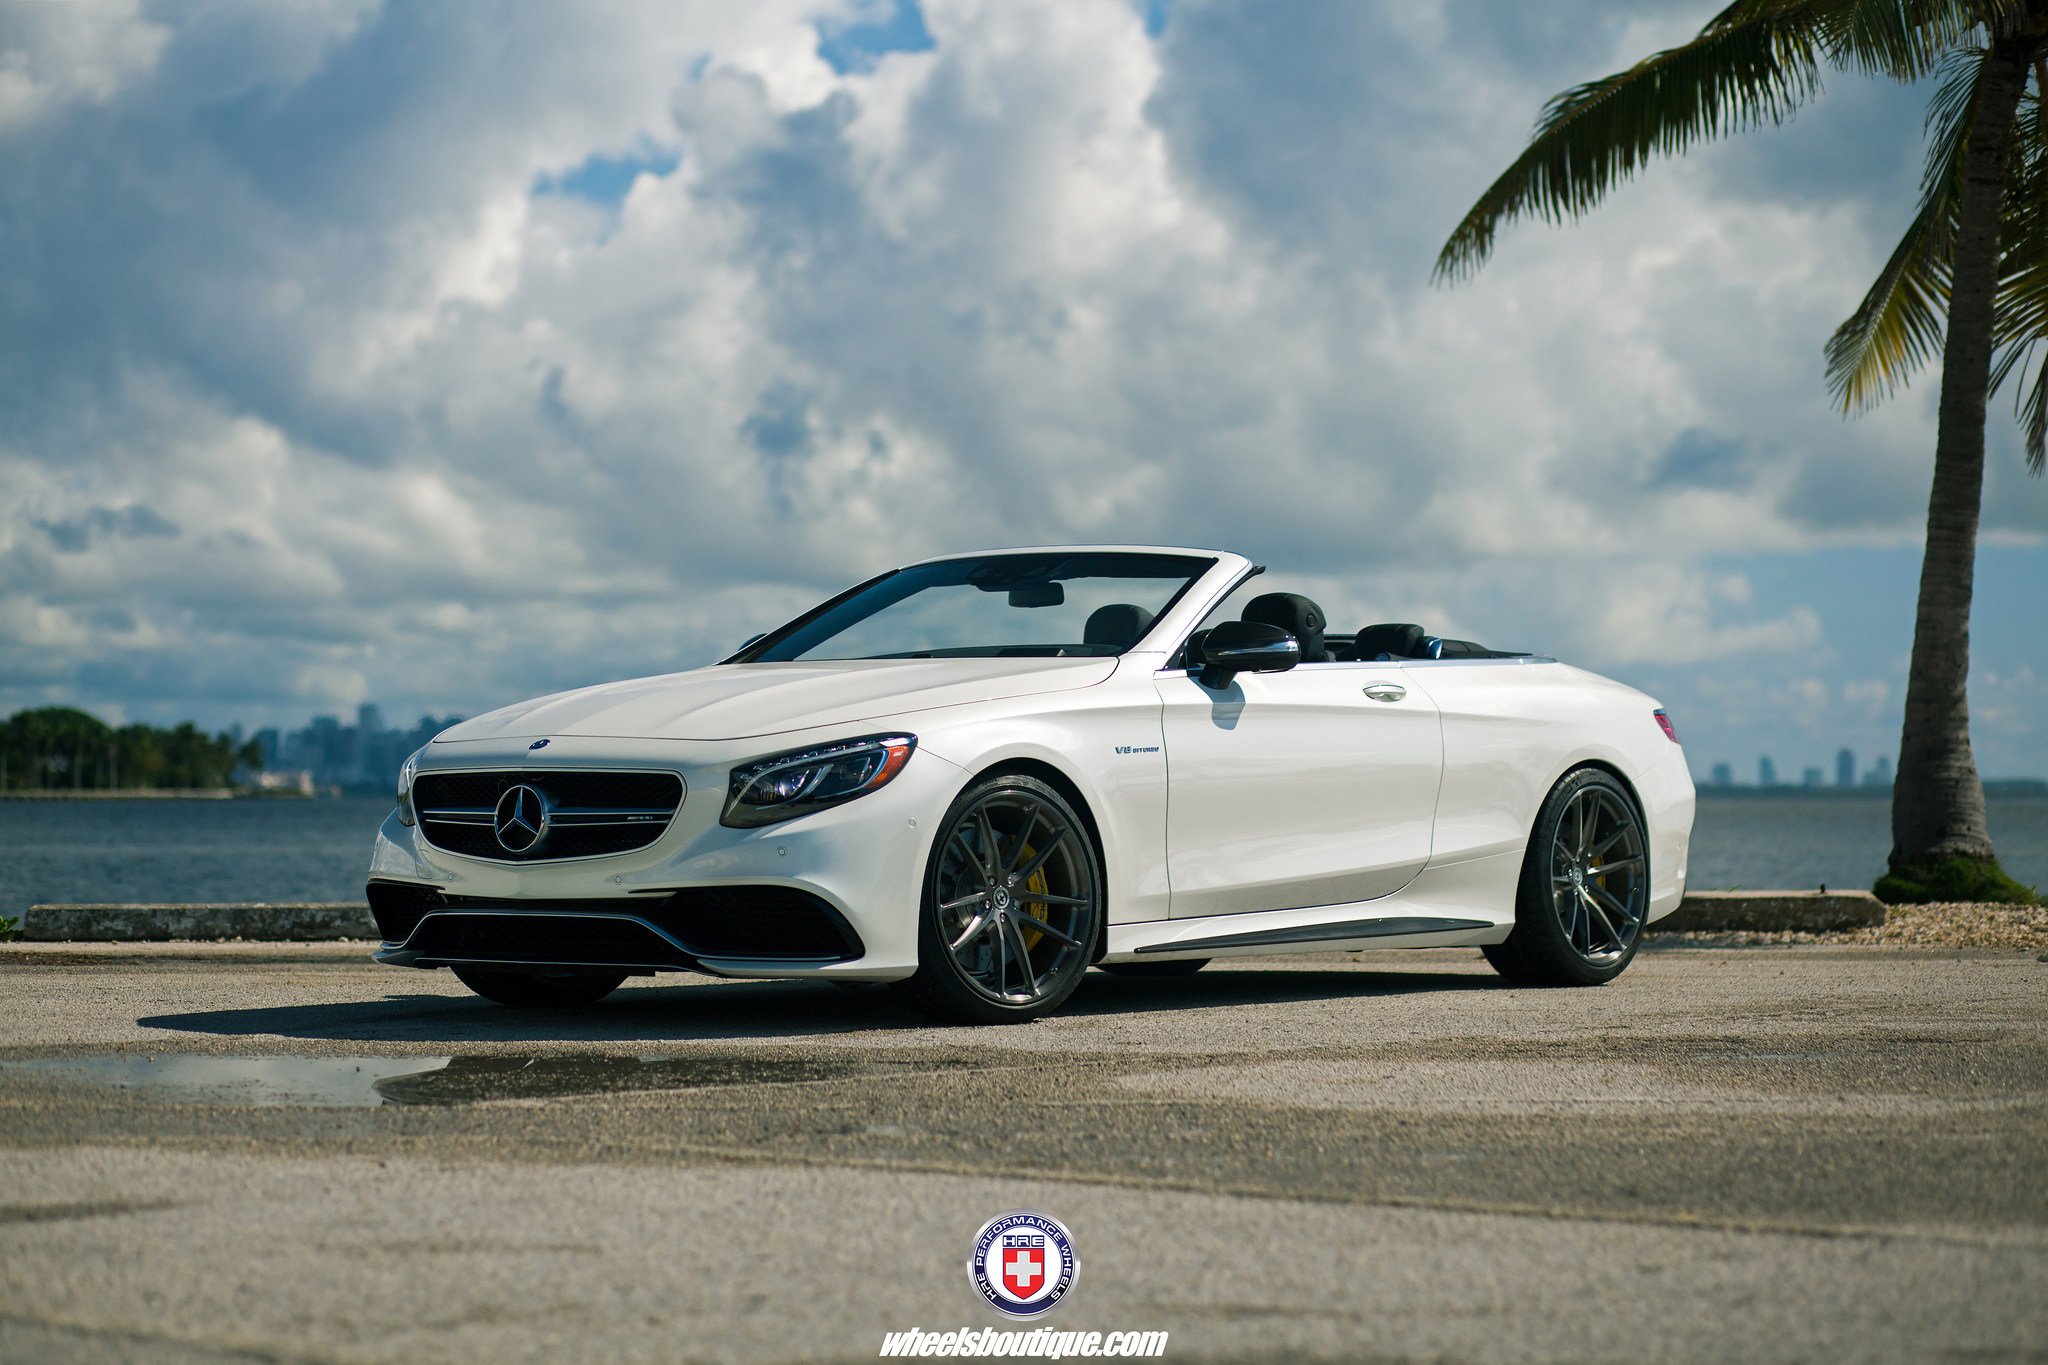 hre, Wheels, Cars, Mercedes, S63, Amg, Cabriolet, White Wallpaper